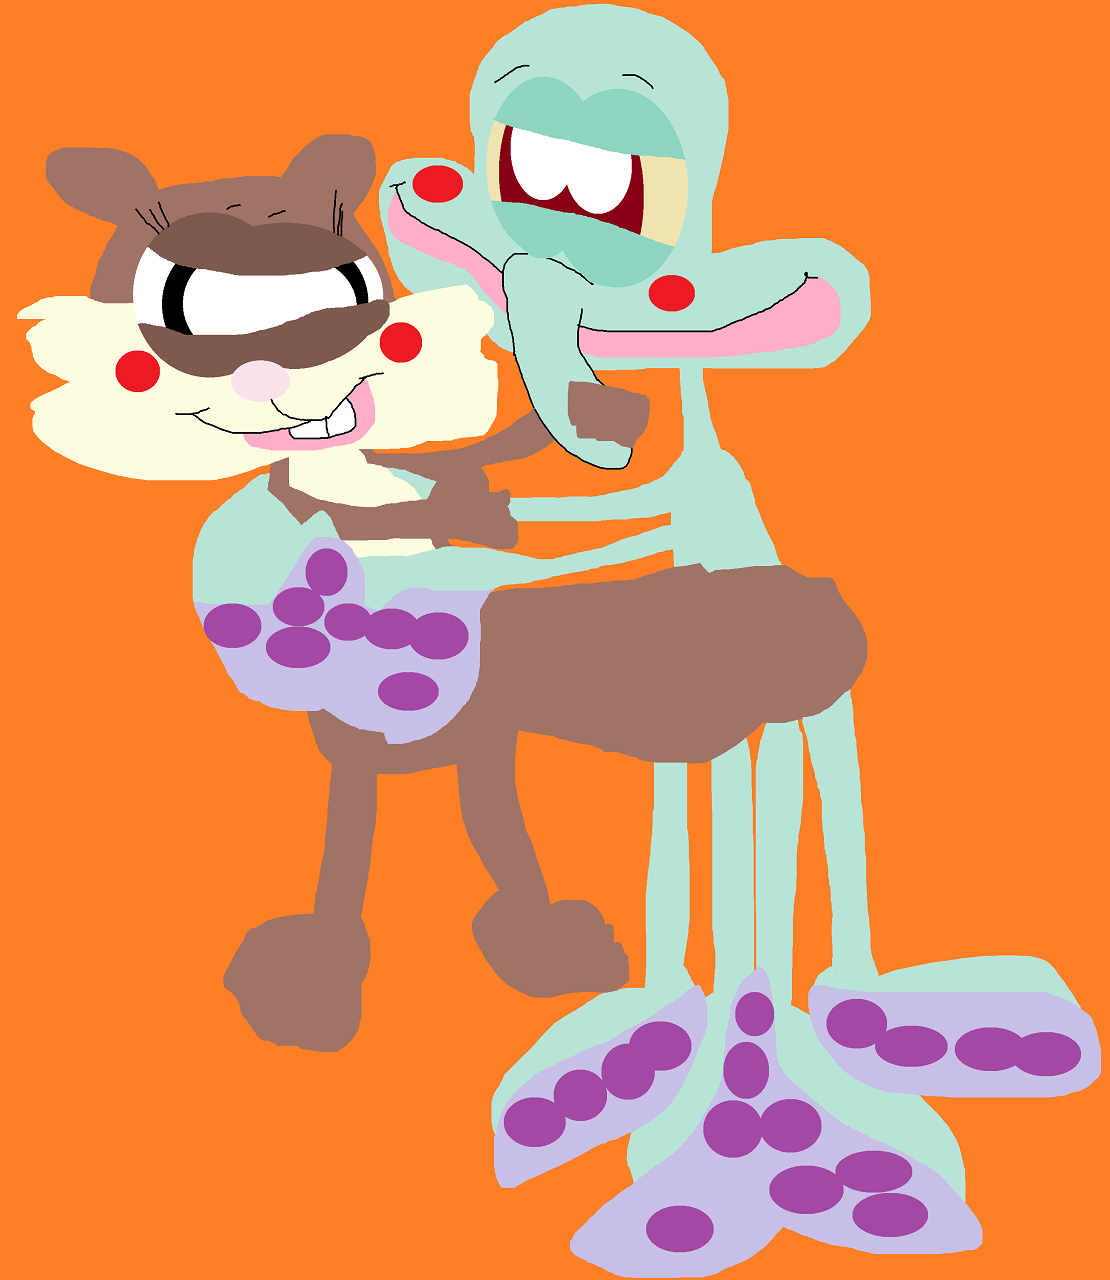 Squidward And Sandy Ready For Action by Falconlobo